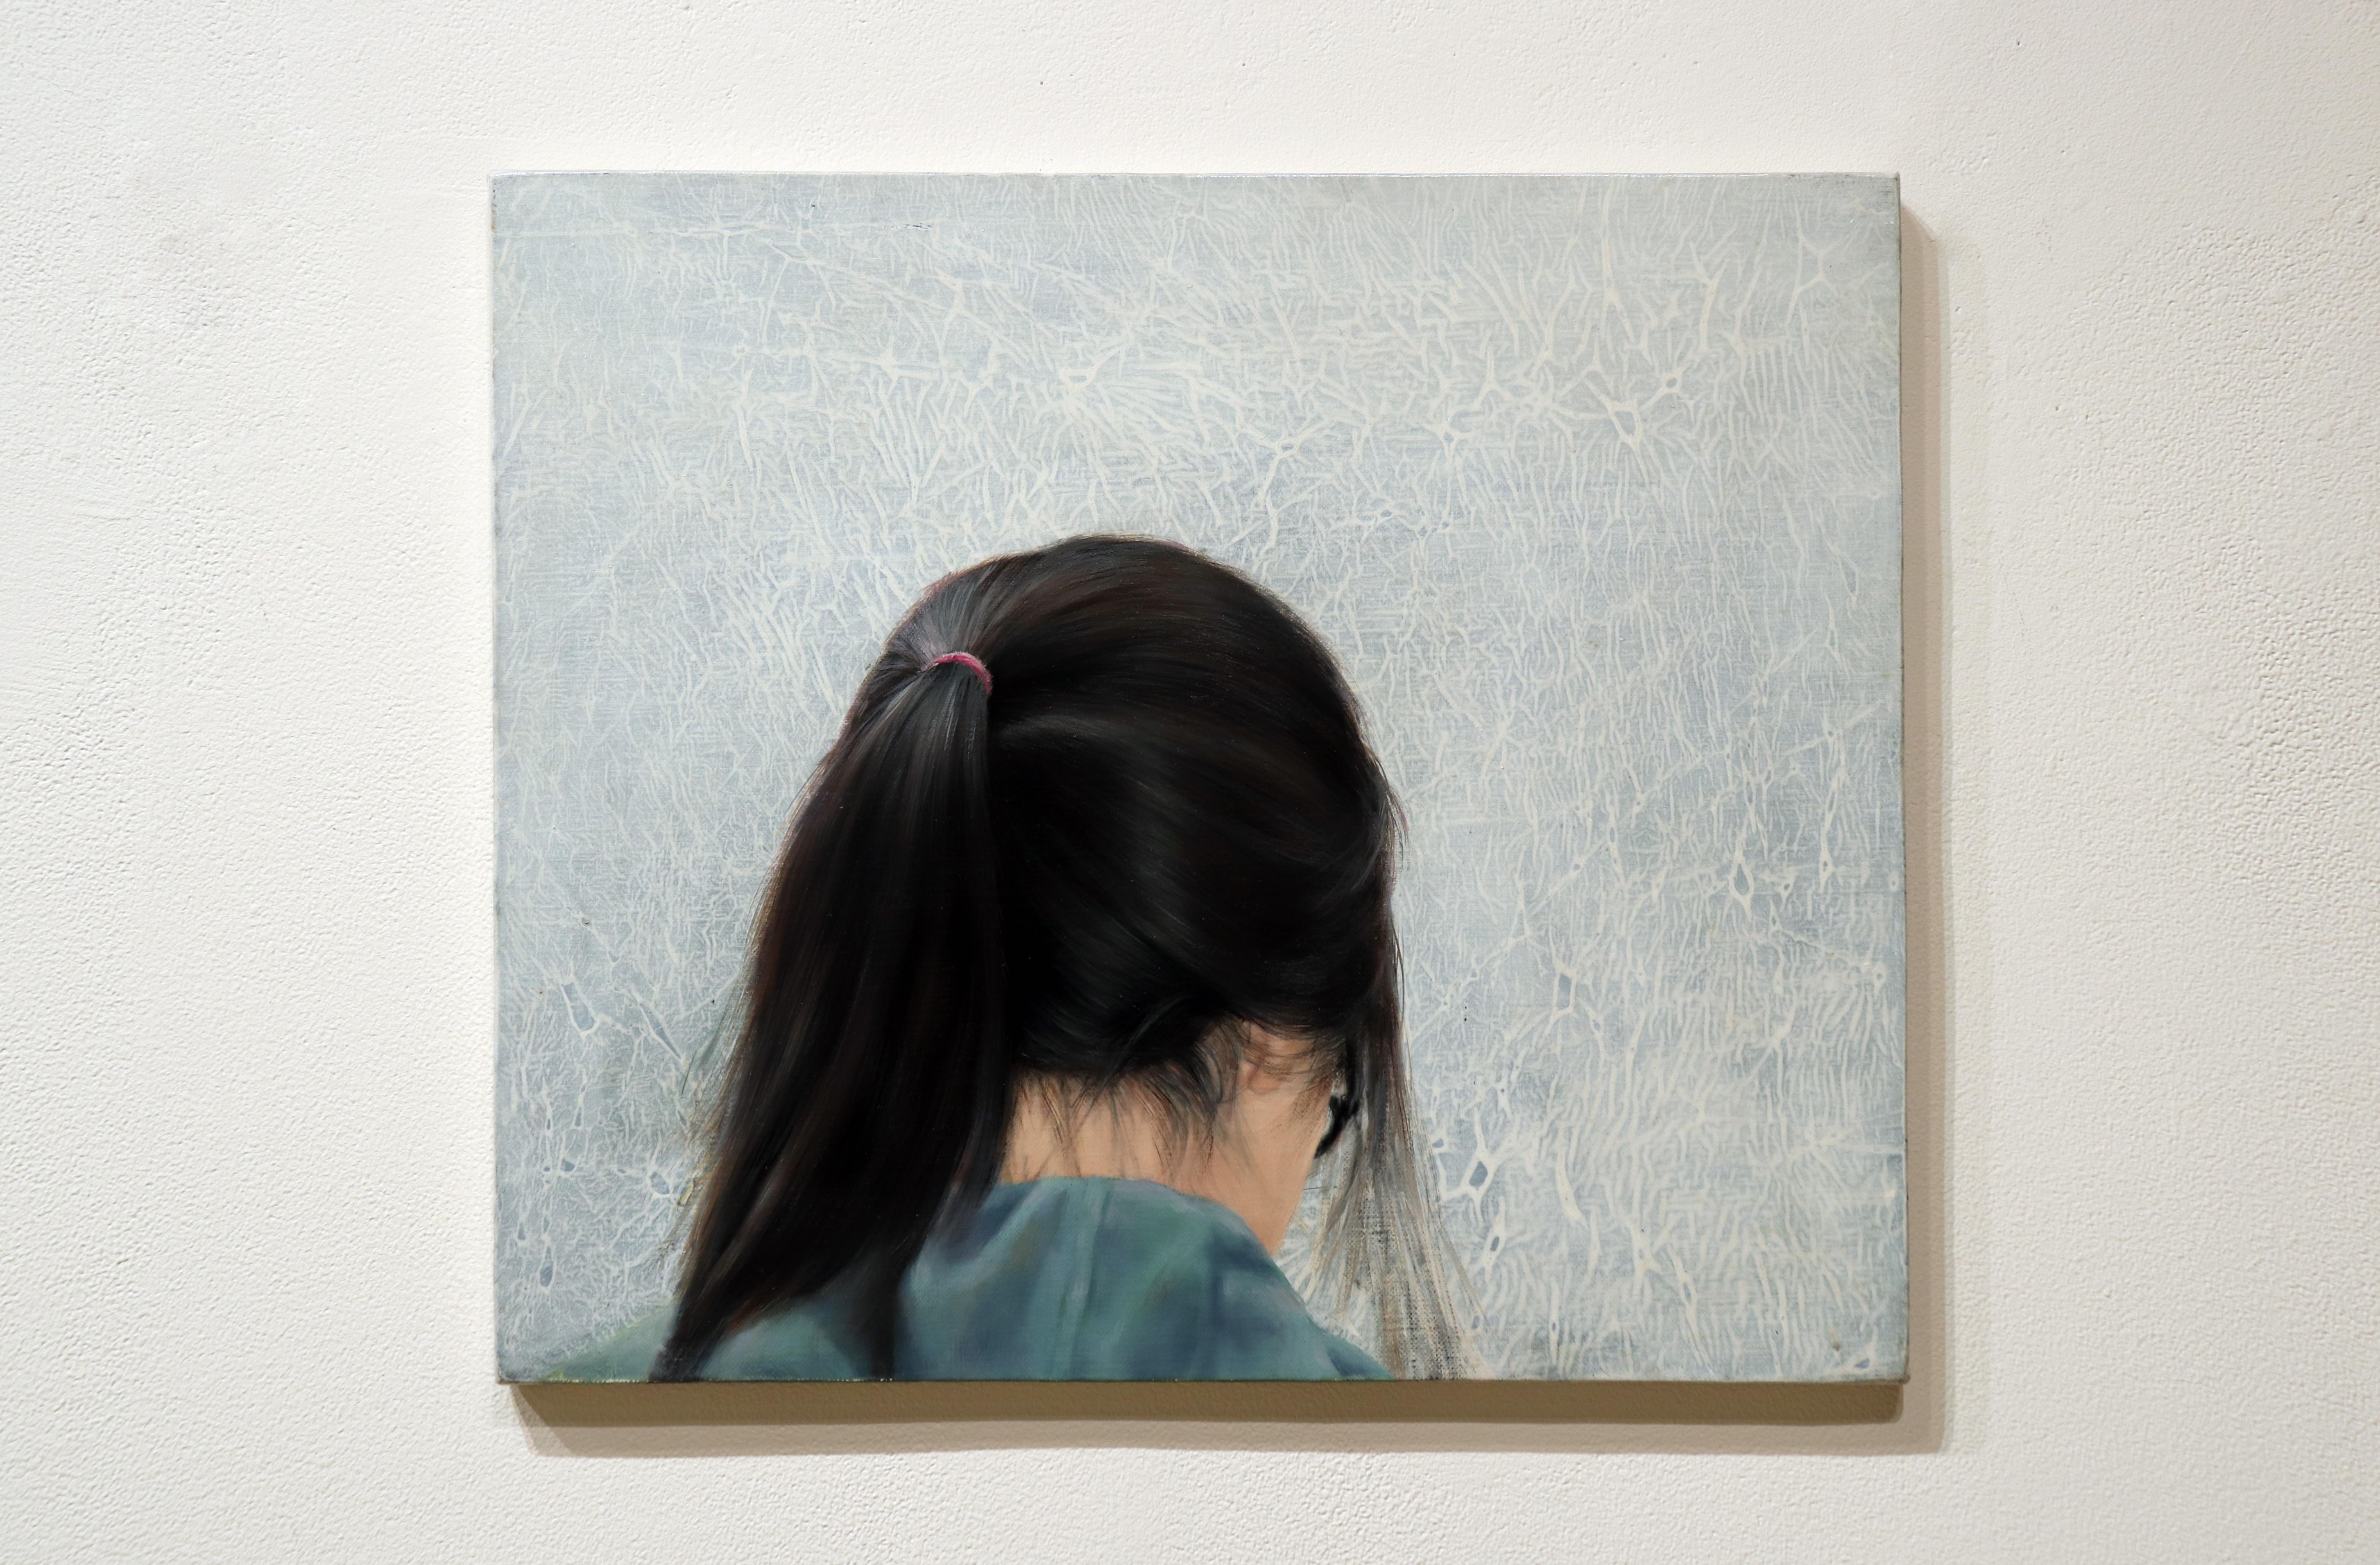 THEIR OWN LANGUAGE - Photorealism / Young Girl with Ponytail and Brown Hair - Painting by Jong-Kie Jeong